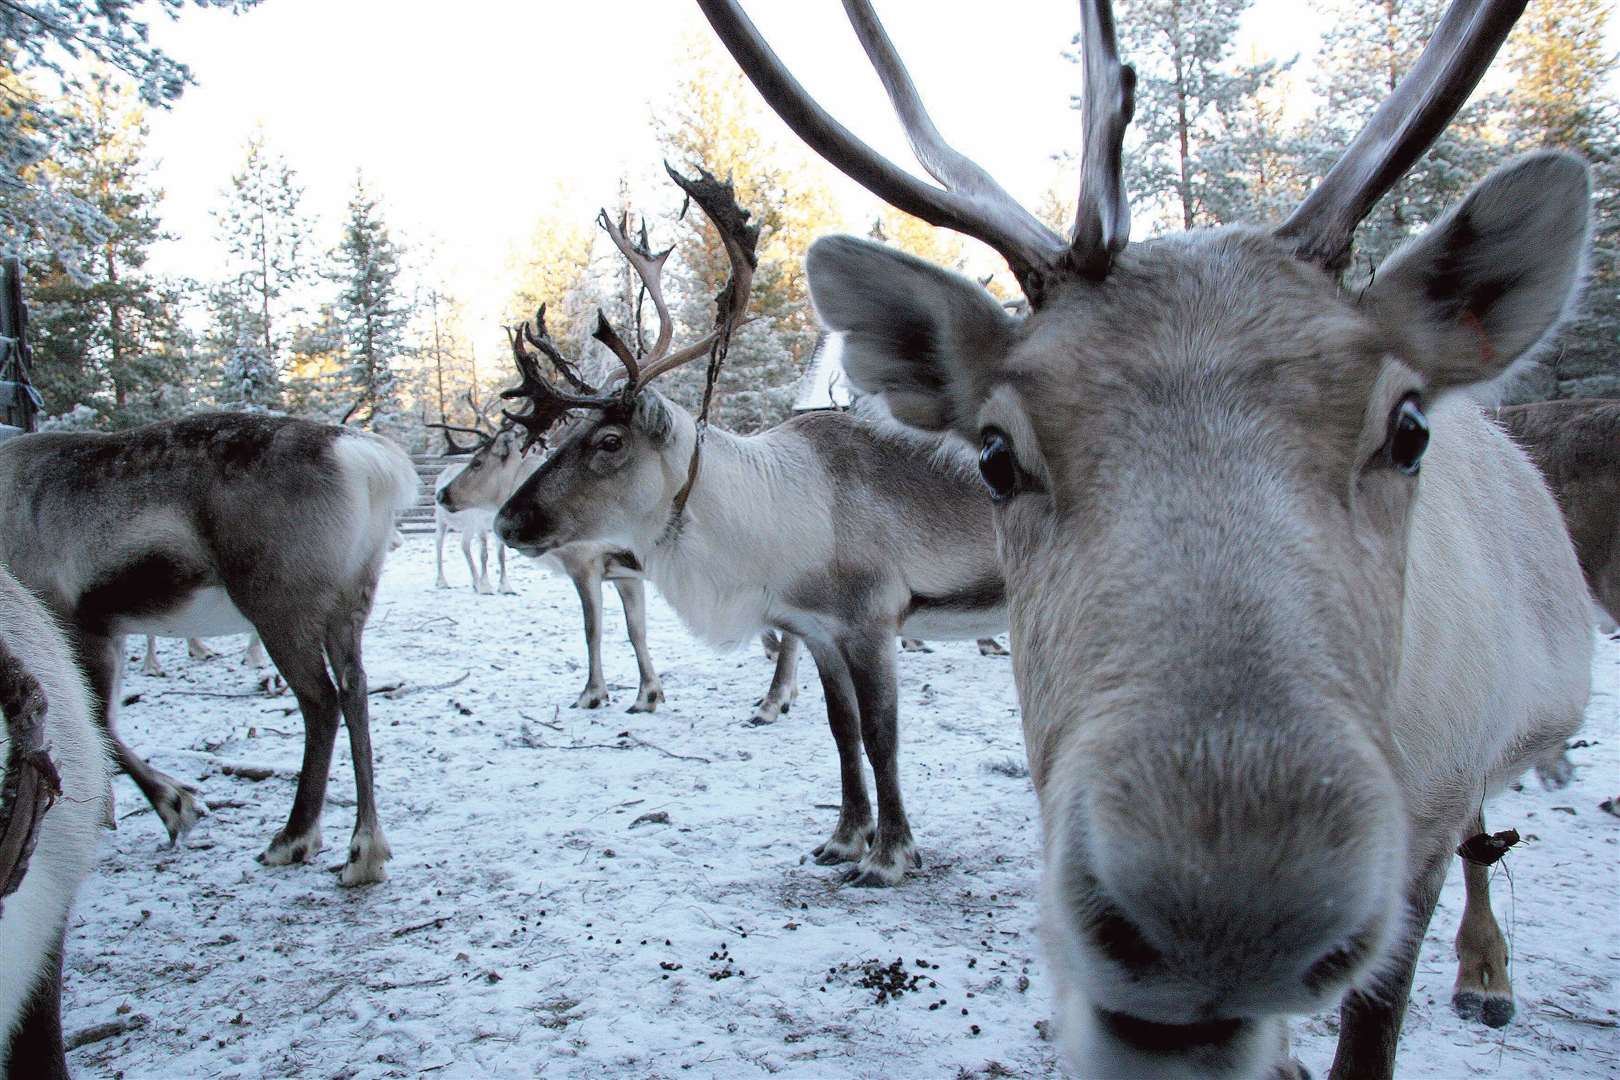 Some discarded chocolate chips might suggest the reindeer have made a visit from Lapland. Image: PA